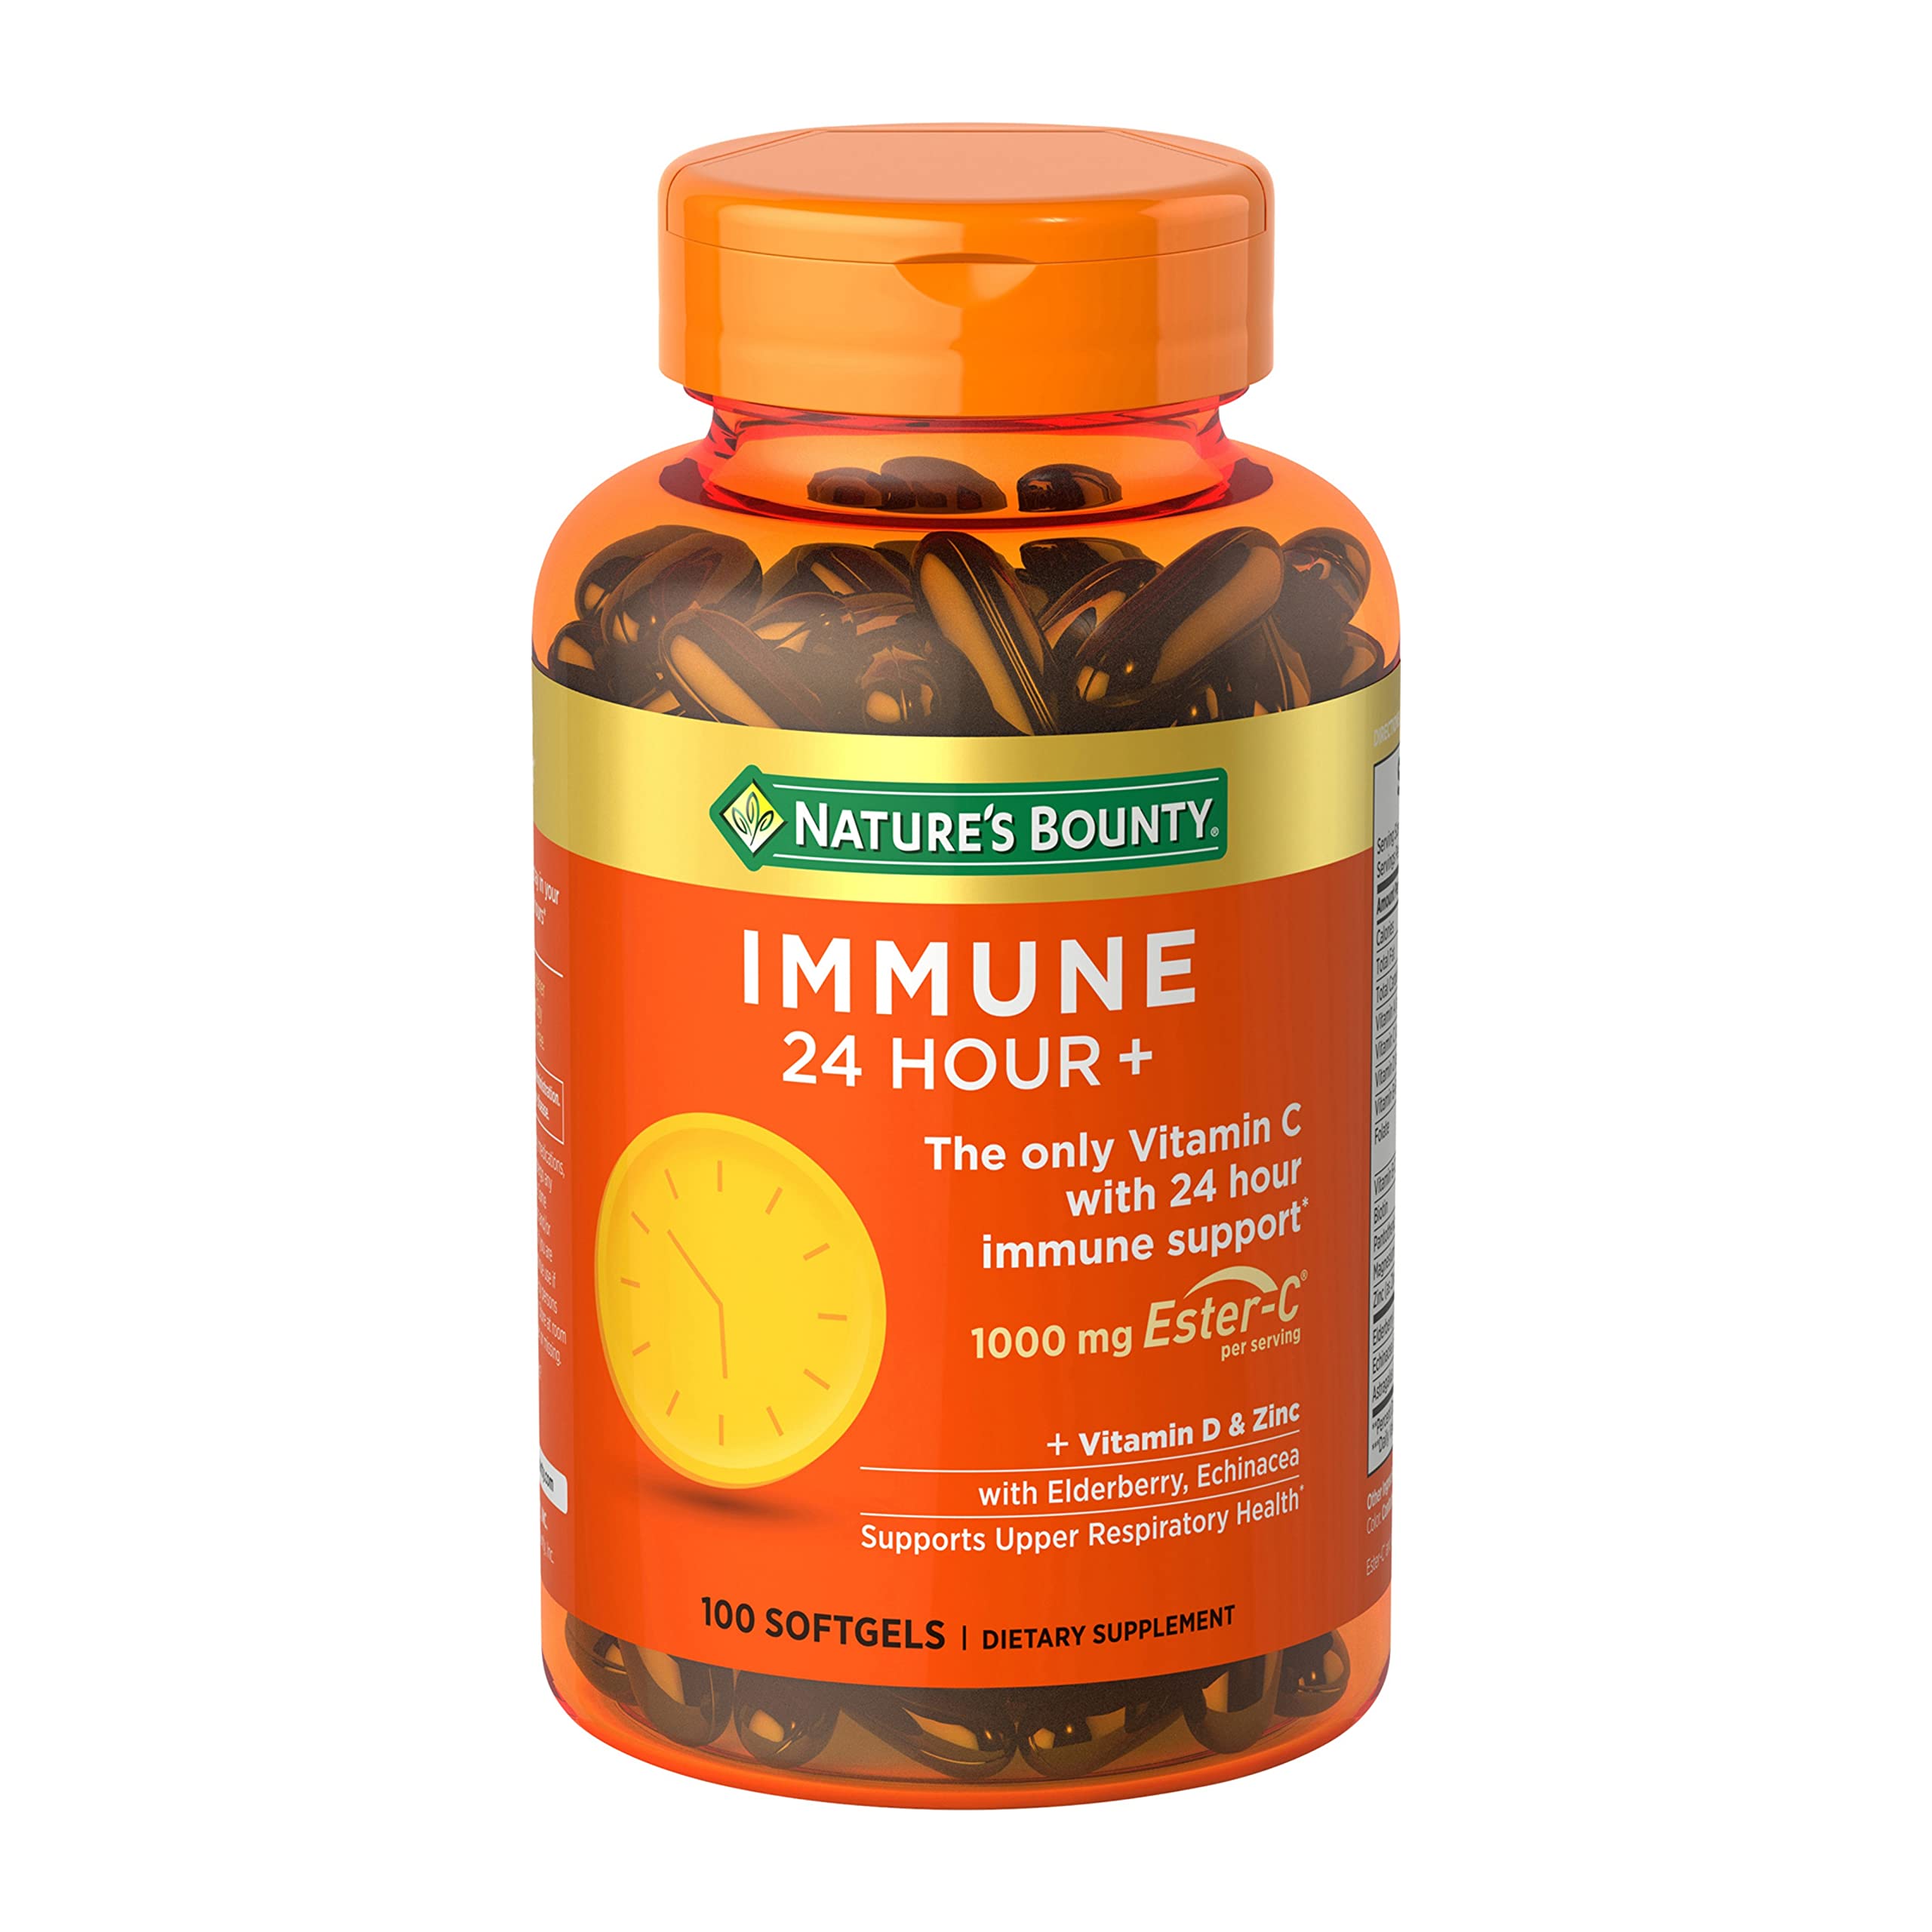 Nature’s Bounty Vitamin C 24 Hour Immune Support with Zinc and Vitamin D, Daily Immune and Upper Respiratory Support, Ester Vitamin C 1000mg Capsules (Softgels), 100 Count